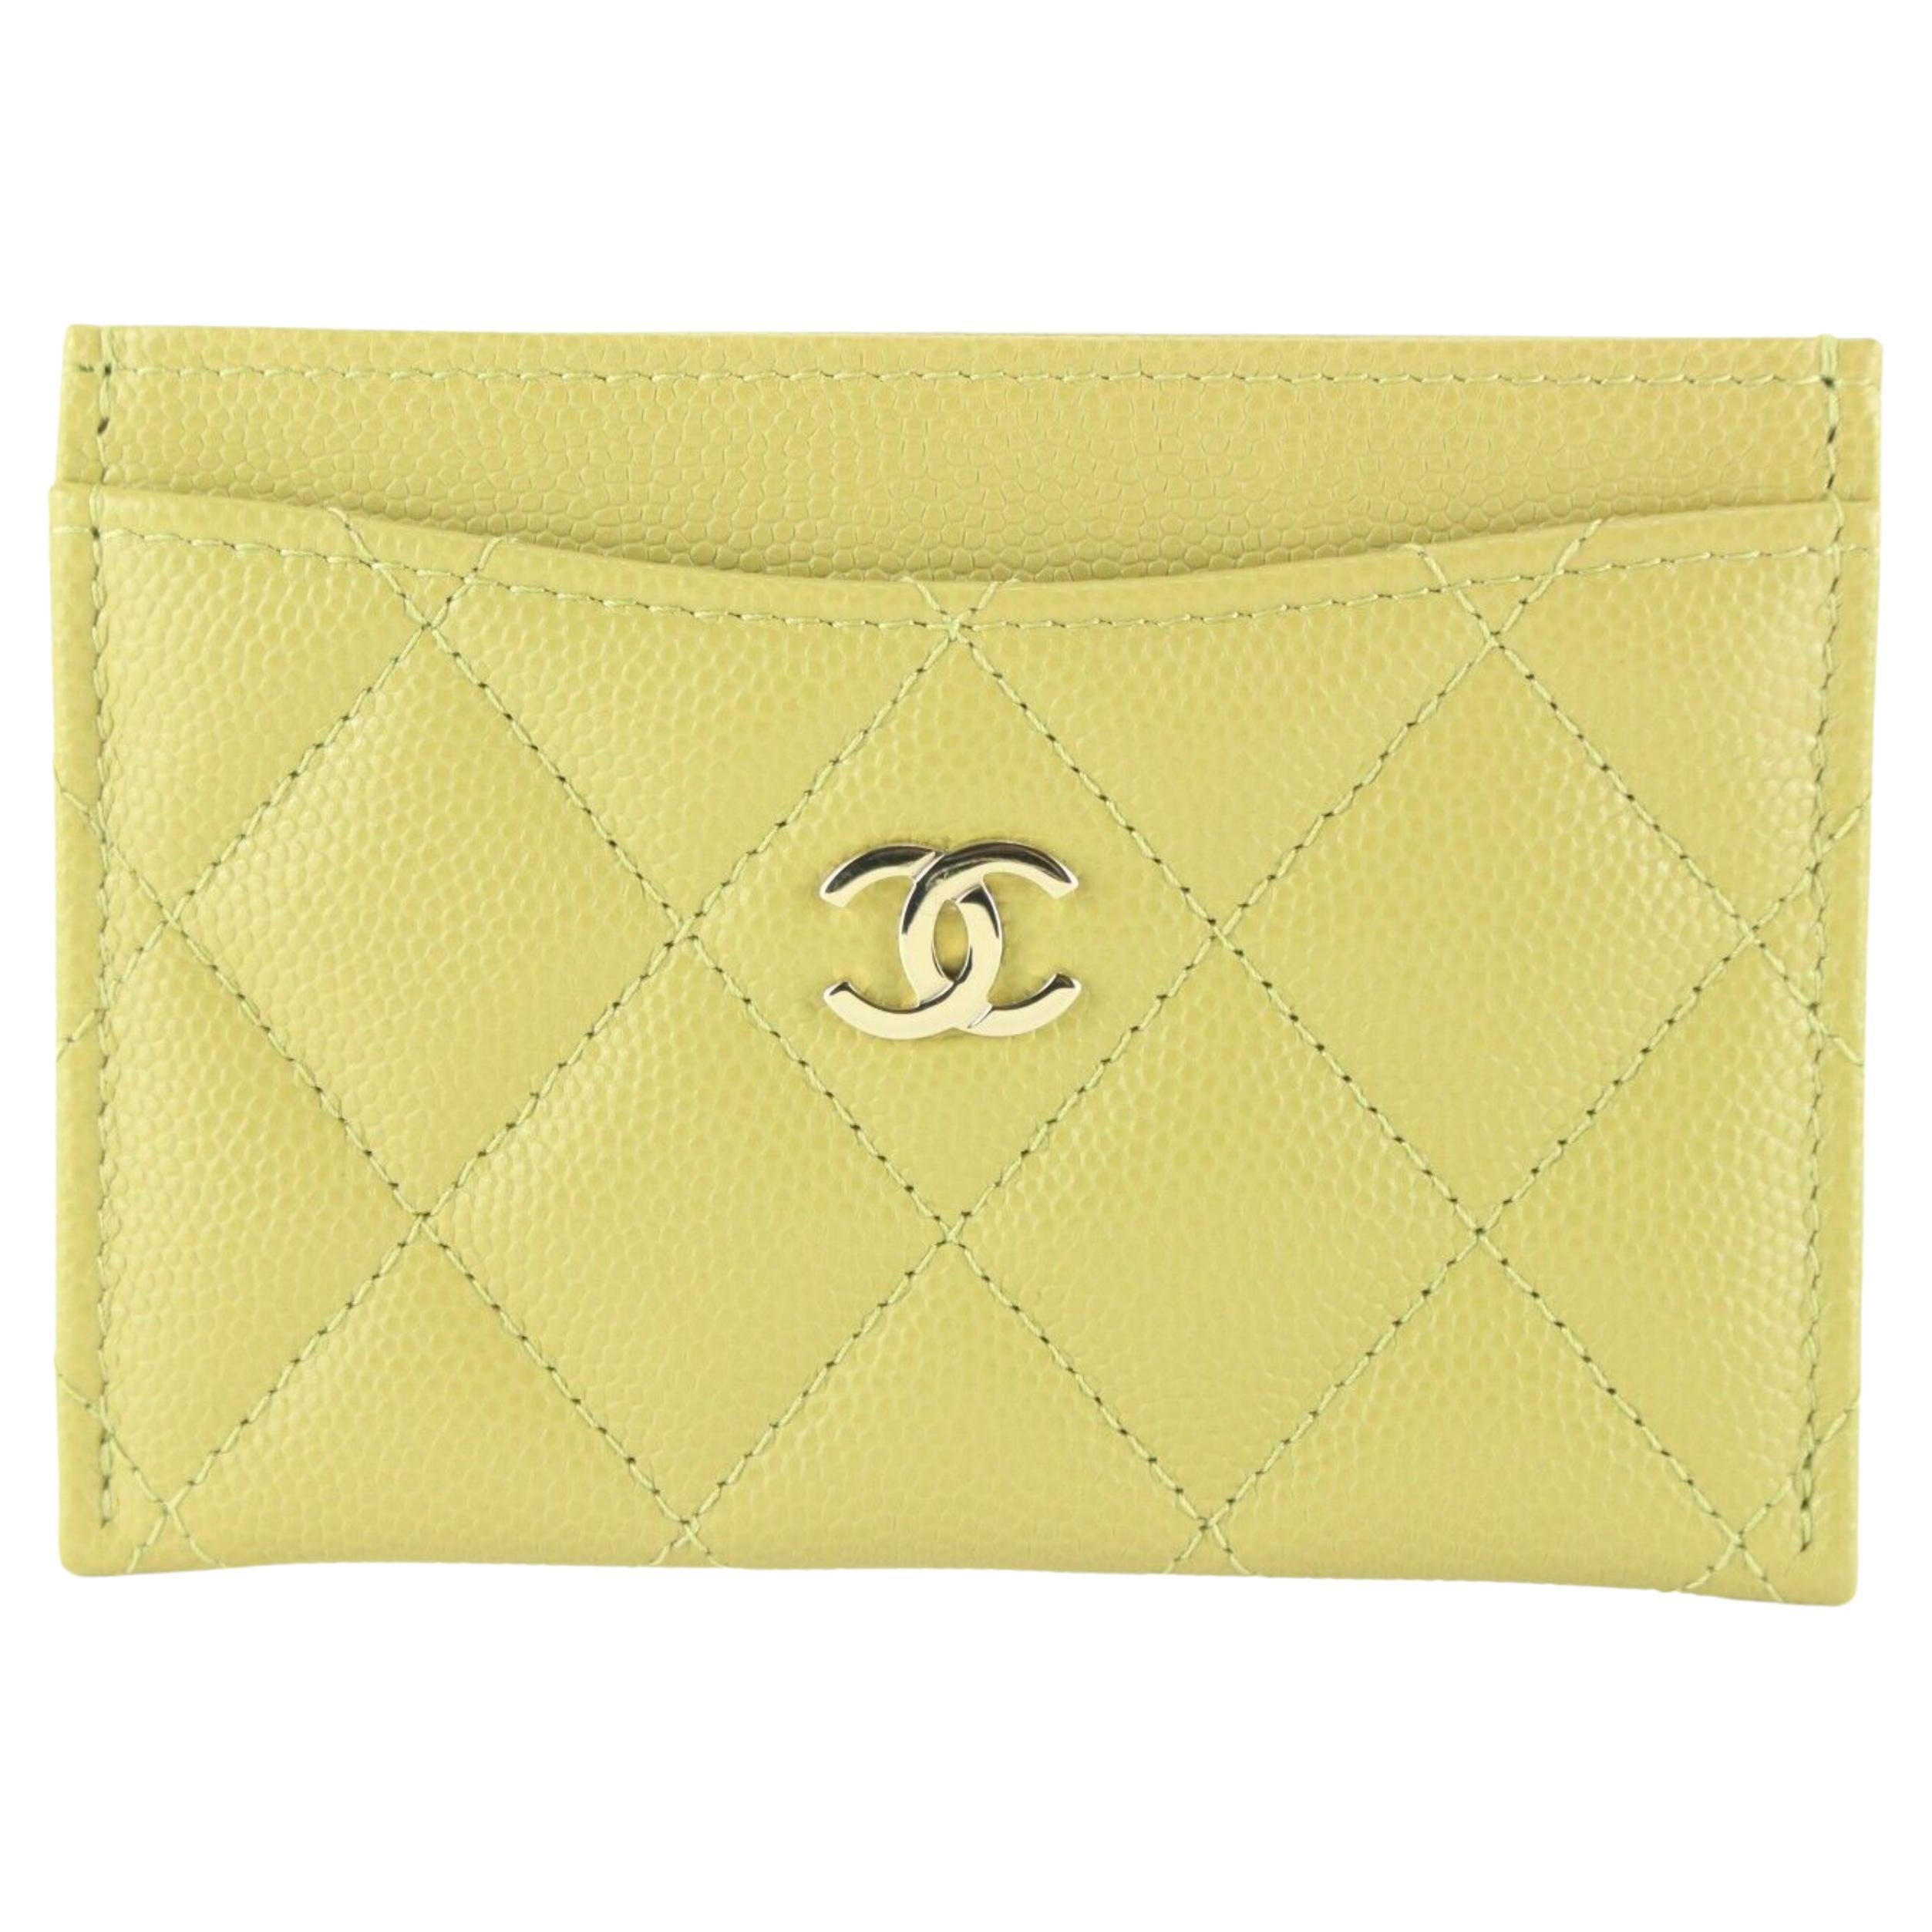 Chanel2 2k Rare Green Caviar Leather Card Holder Wallet Case GHW2CJ1229 For Sale